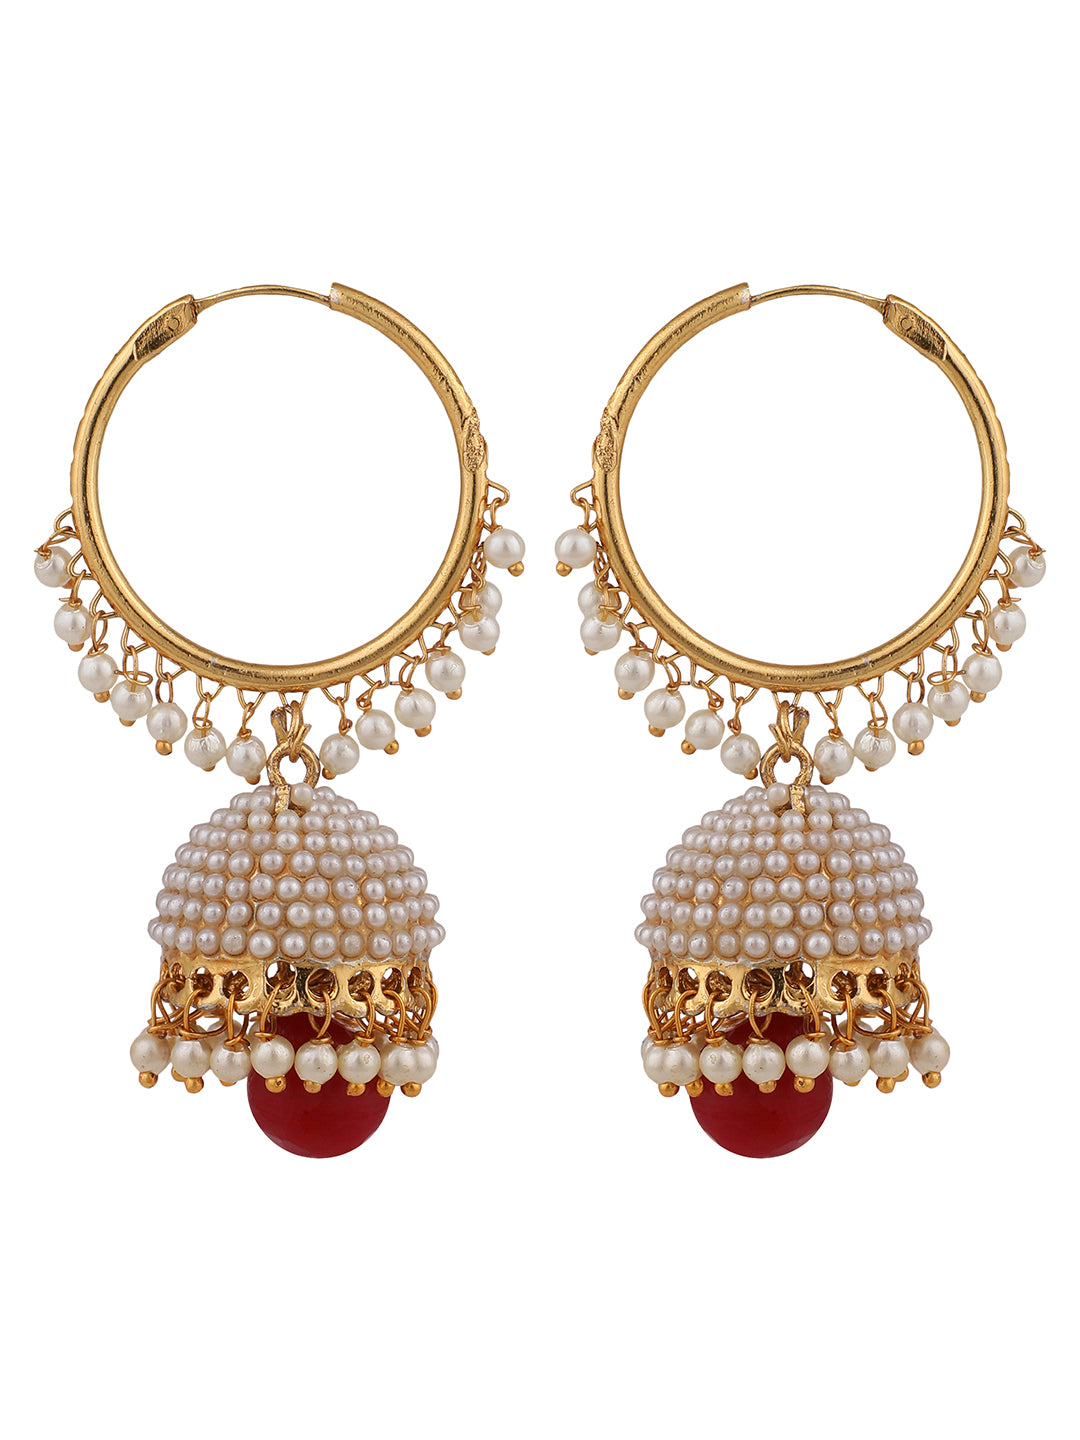 Women's Off-White Pearl Maroon Gold Plated Hoop with Jhumka Earring - Anikas Creation